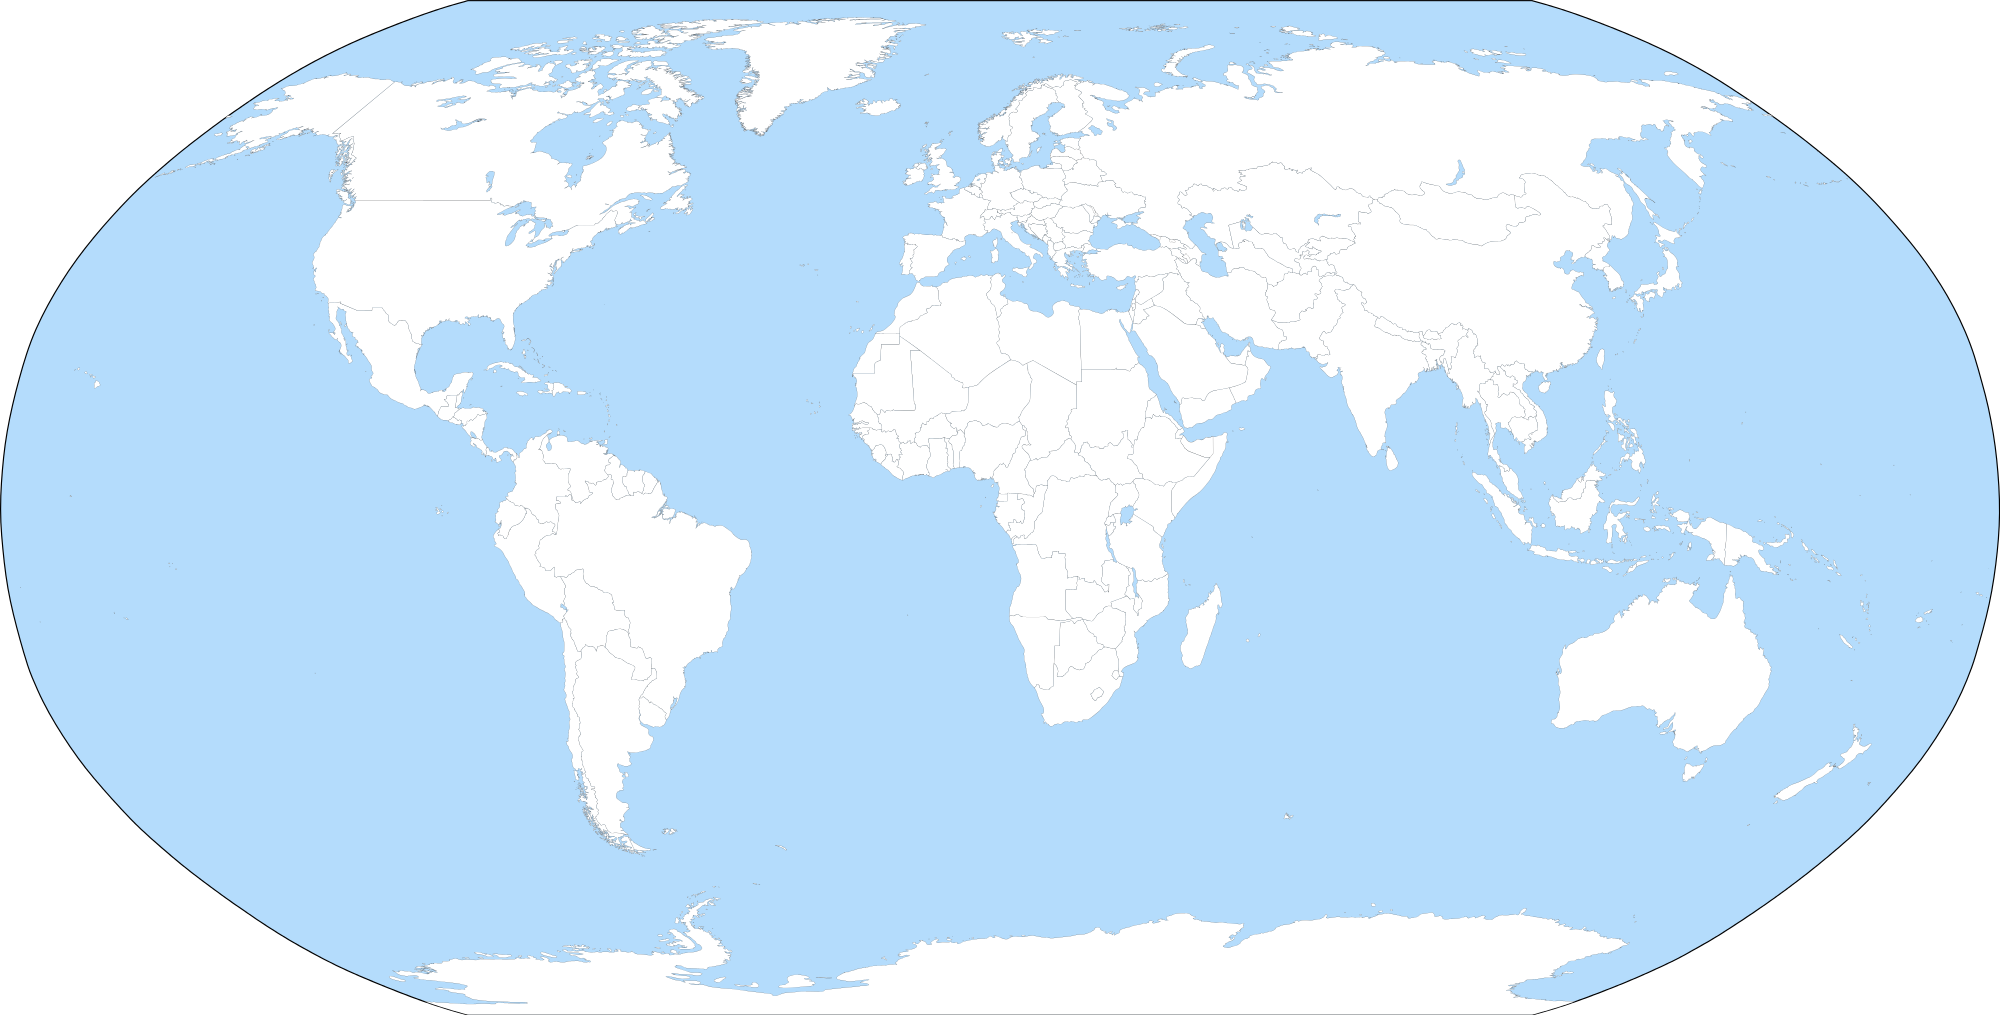 Filea Large Blank World Map With Oceans Marked In Blue Clipart